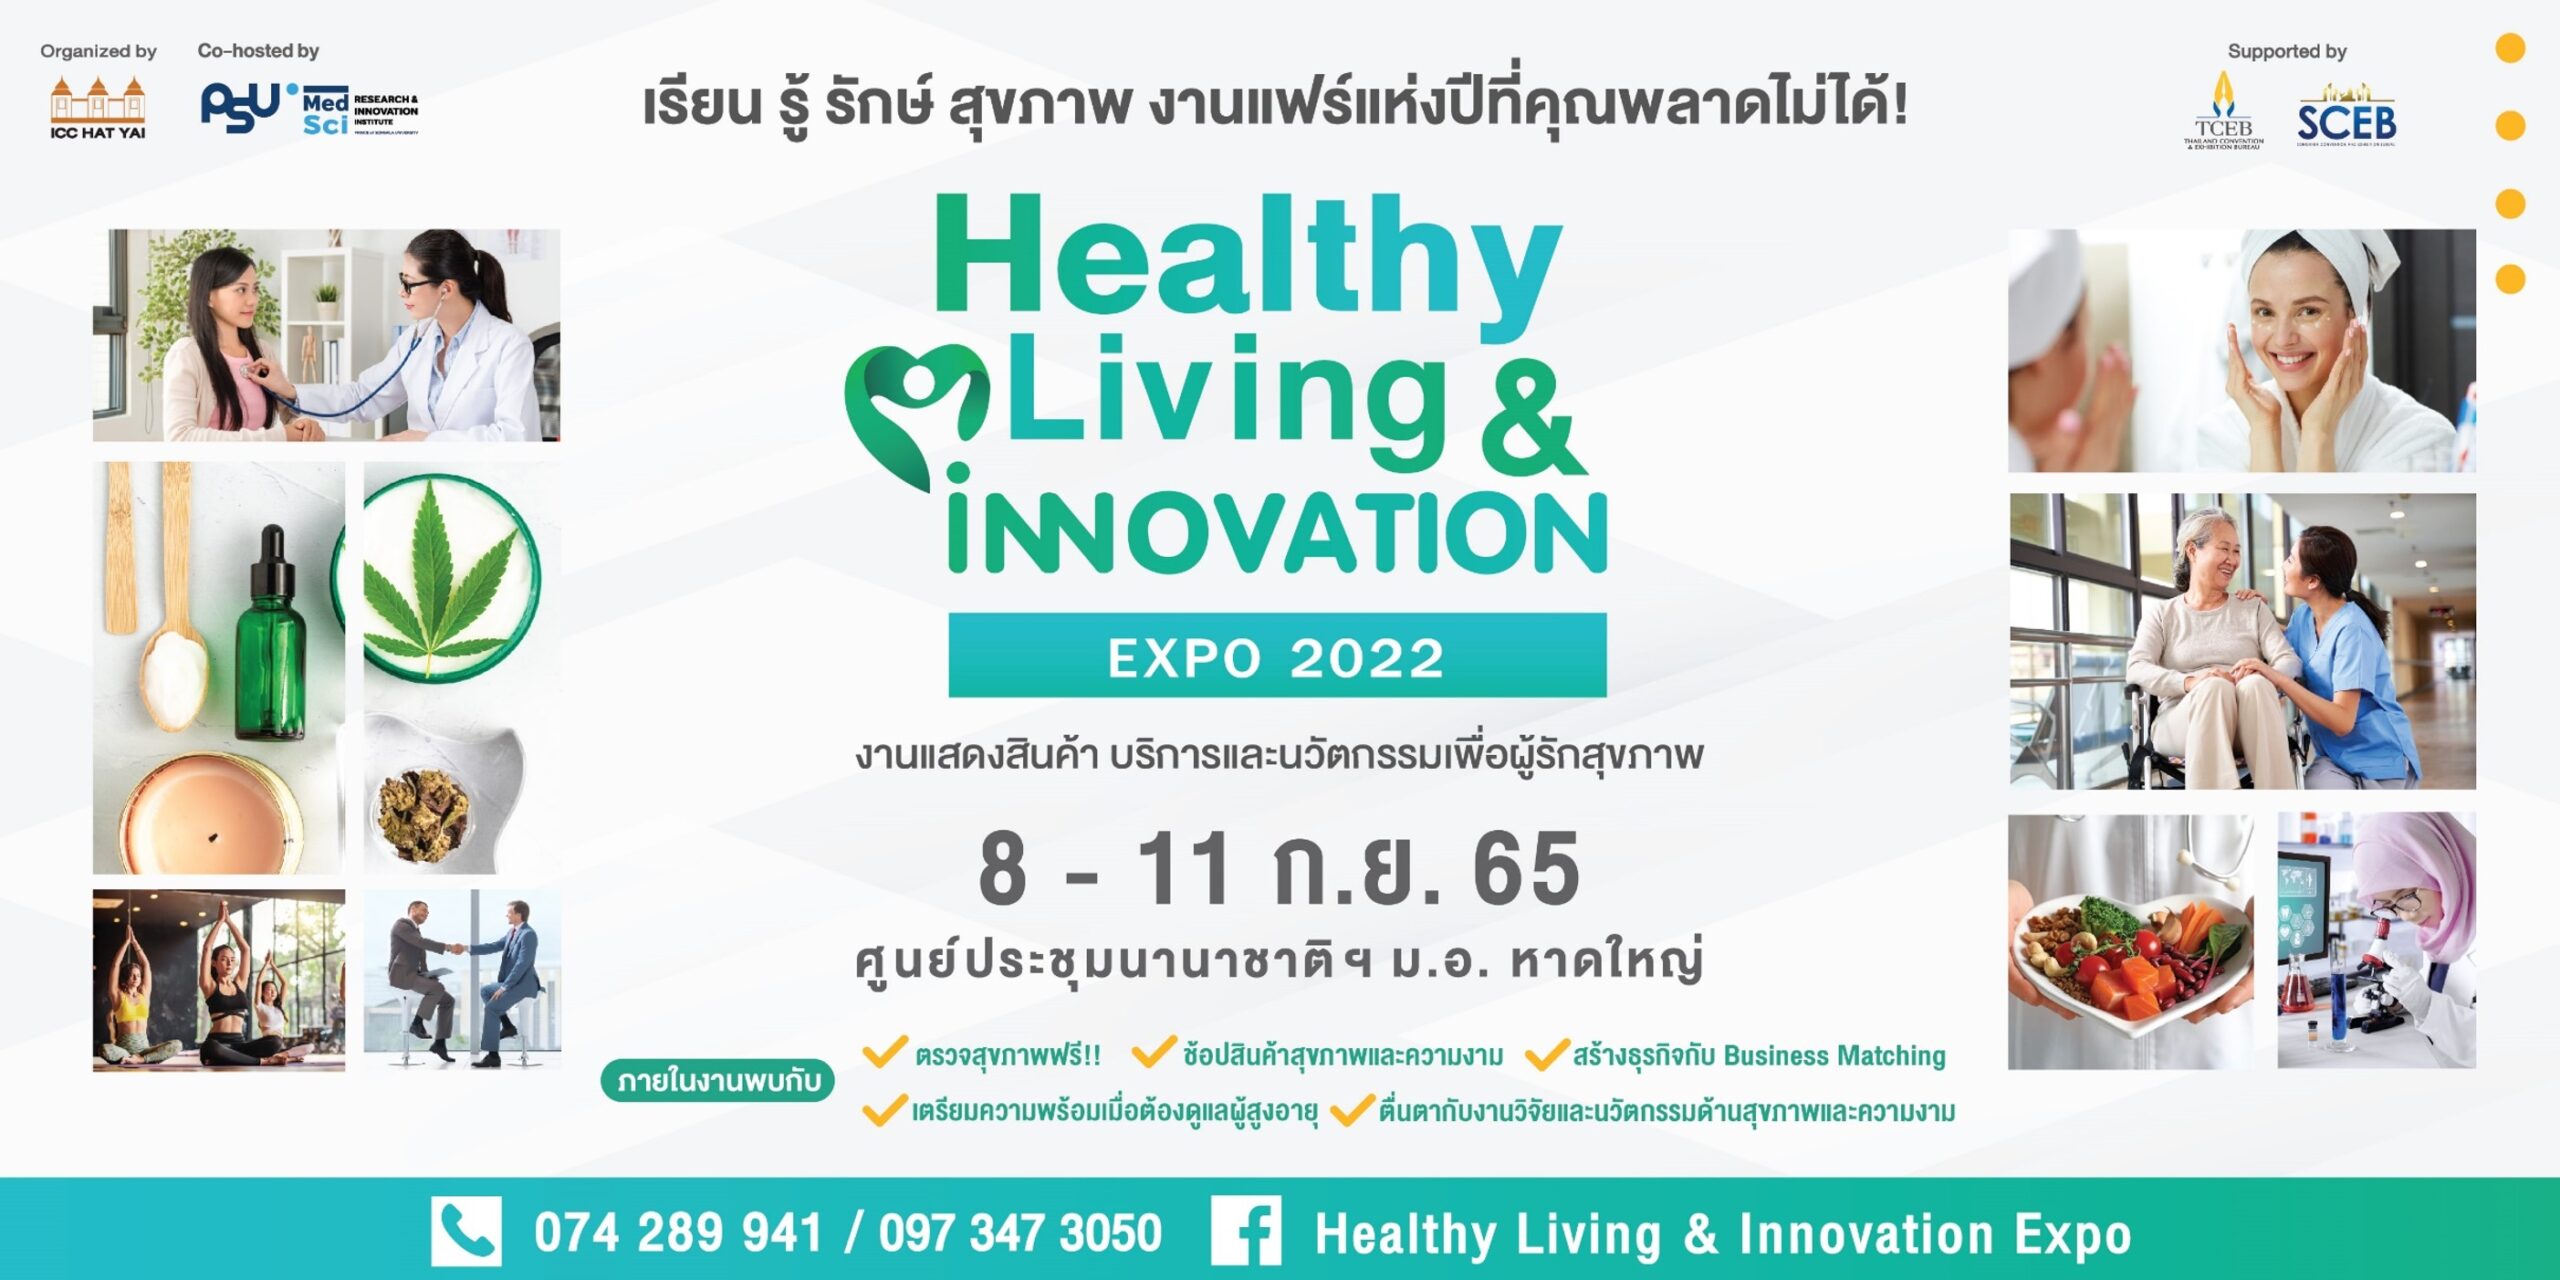 Healthy Living & Innovation Expo 2022